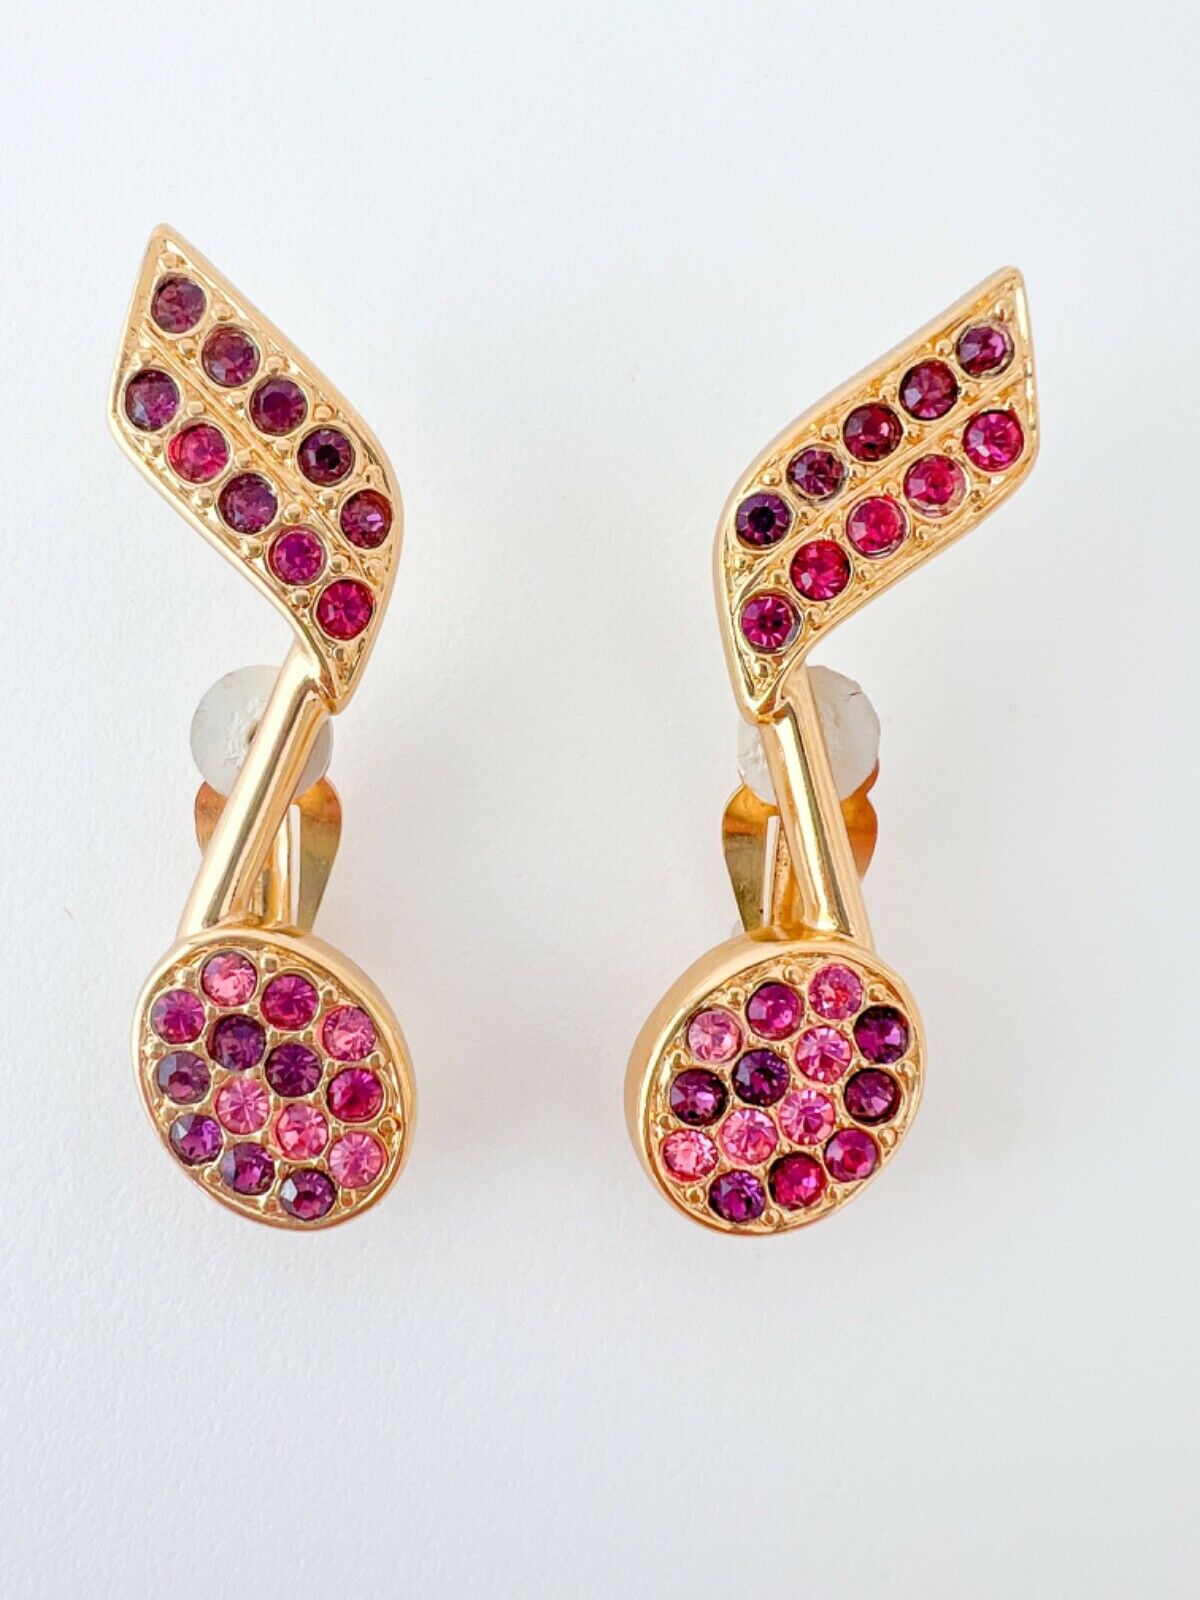 【SOLD OUT】YSL Yves Saint Laurent Vintage Earrings Musical Note Pink Made in France